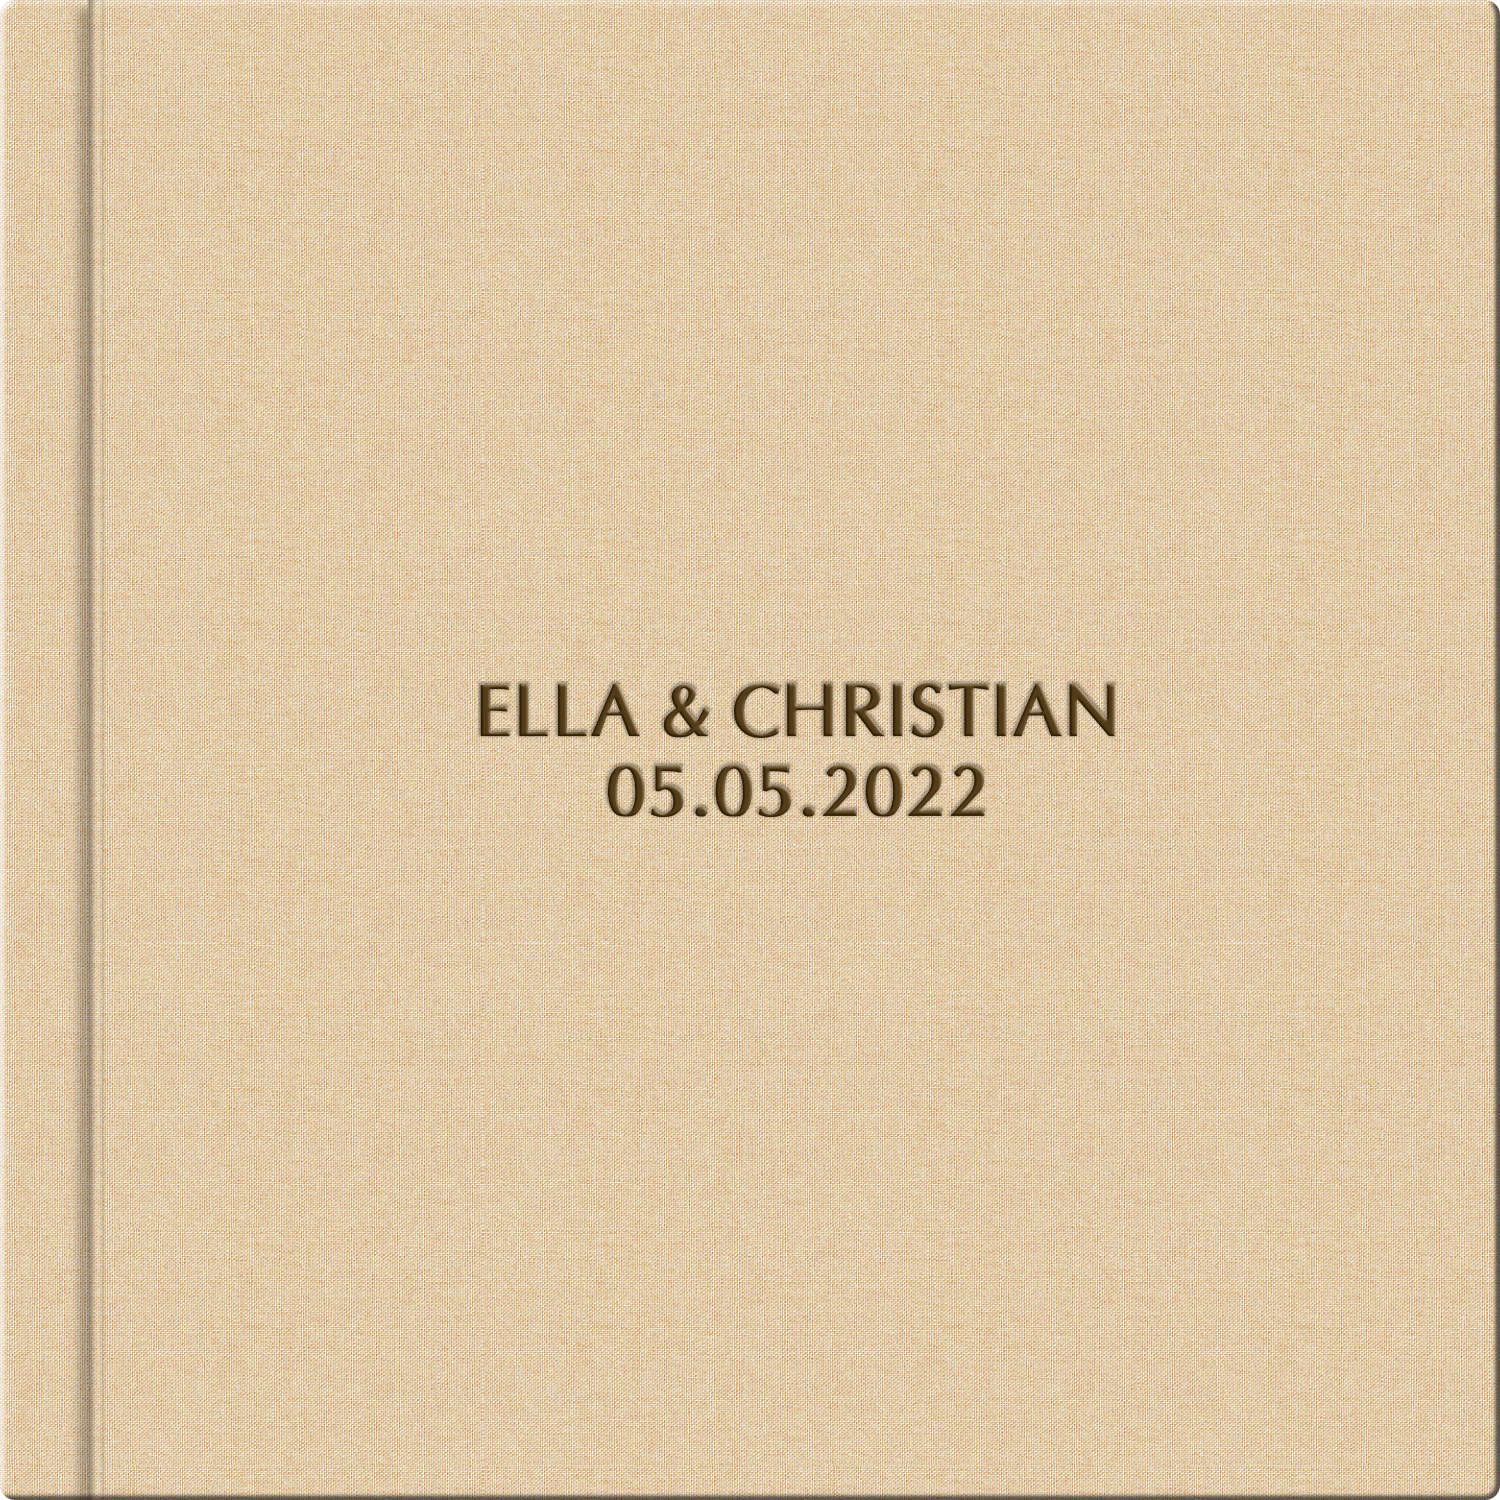 Wedding album cover with embossed title